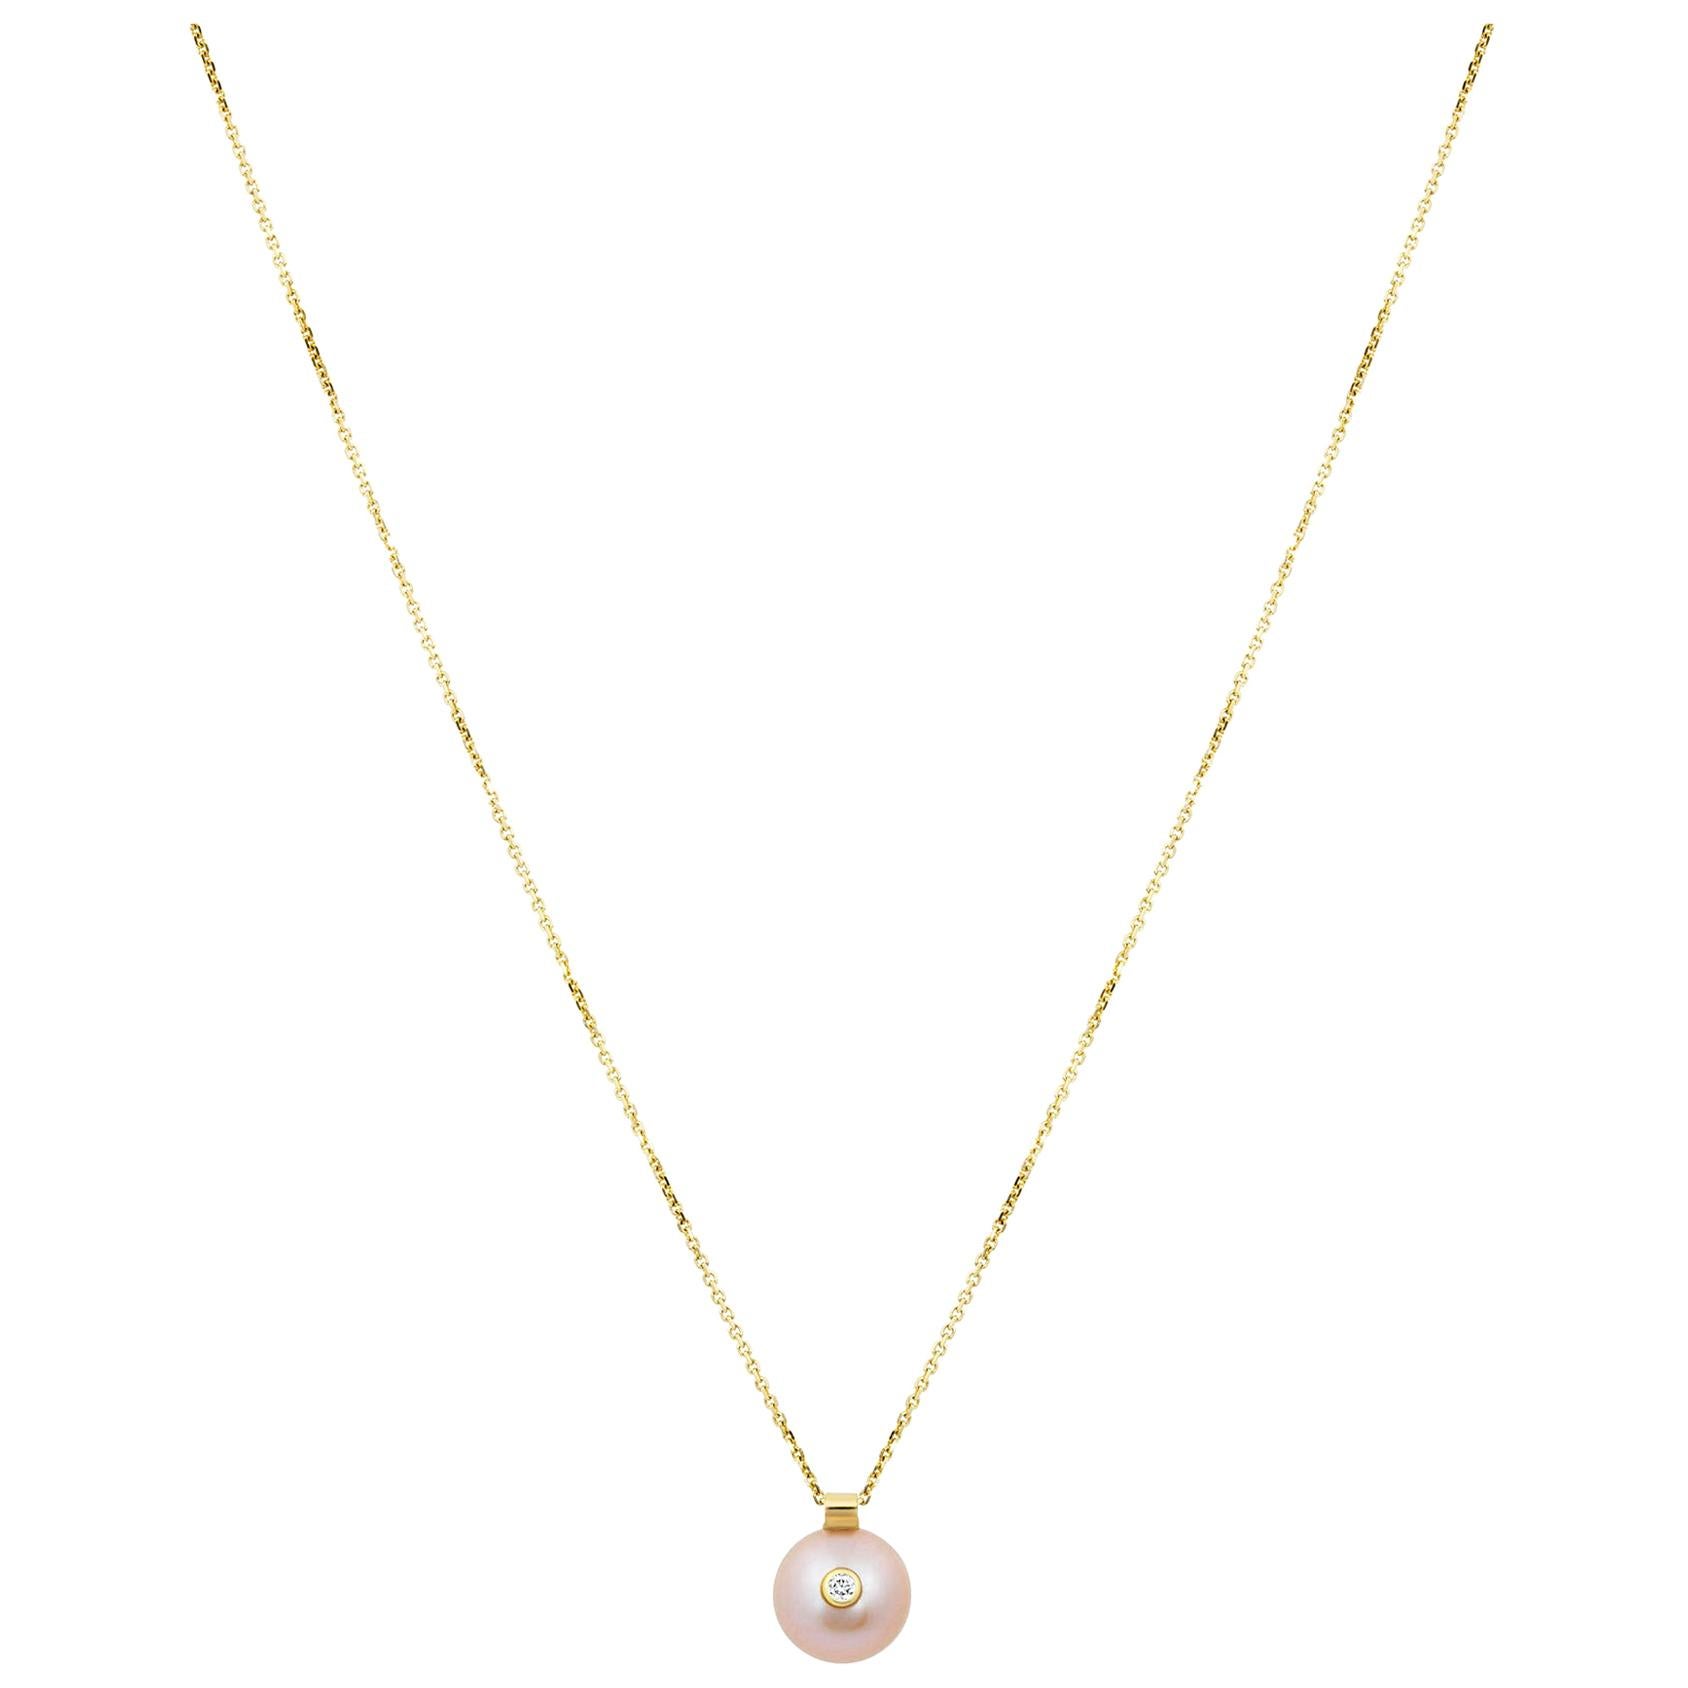 14 Karat Yellow Gold Diamond and Pearl Necklace